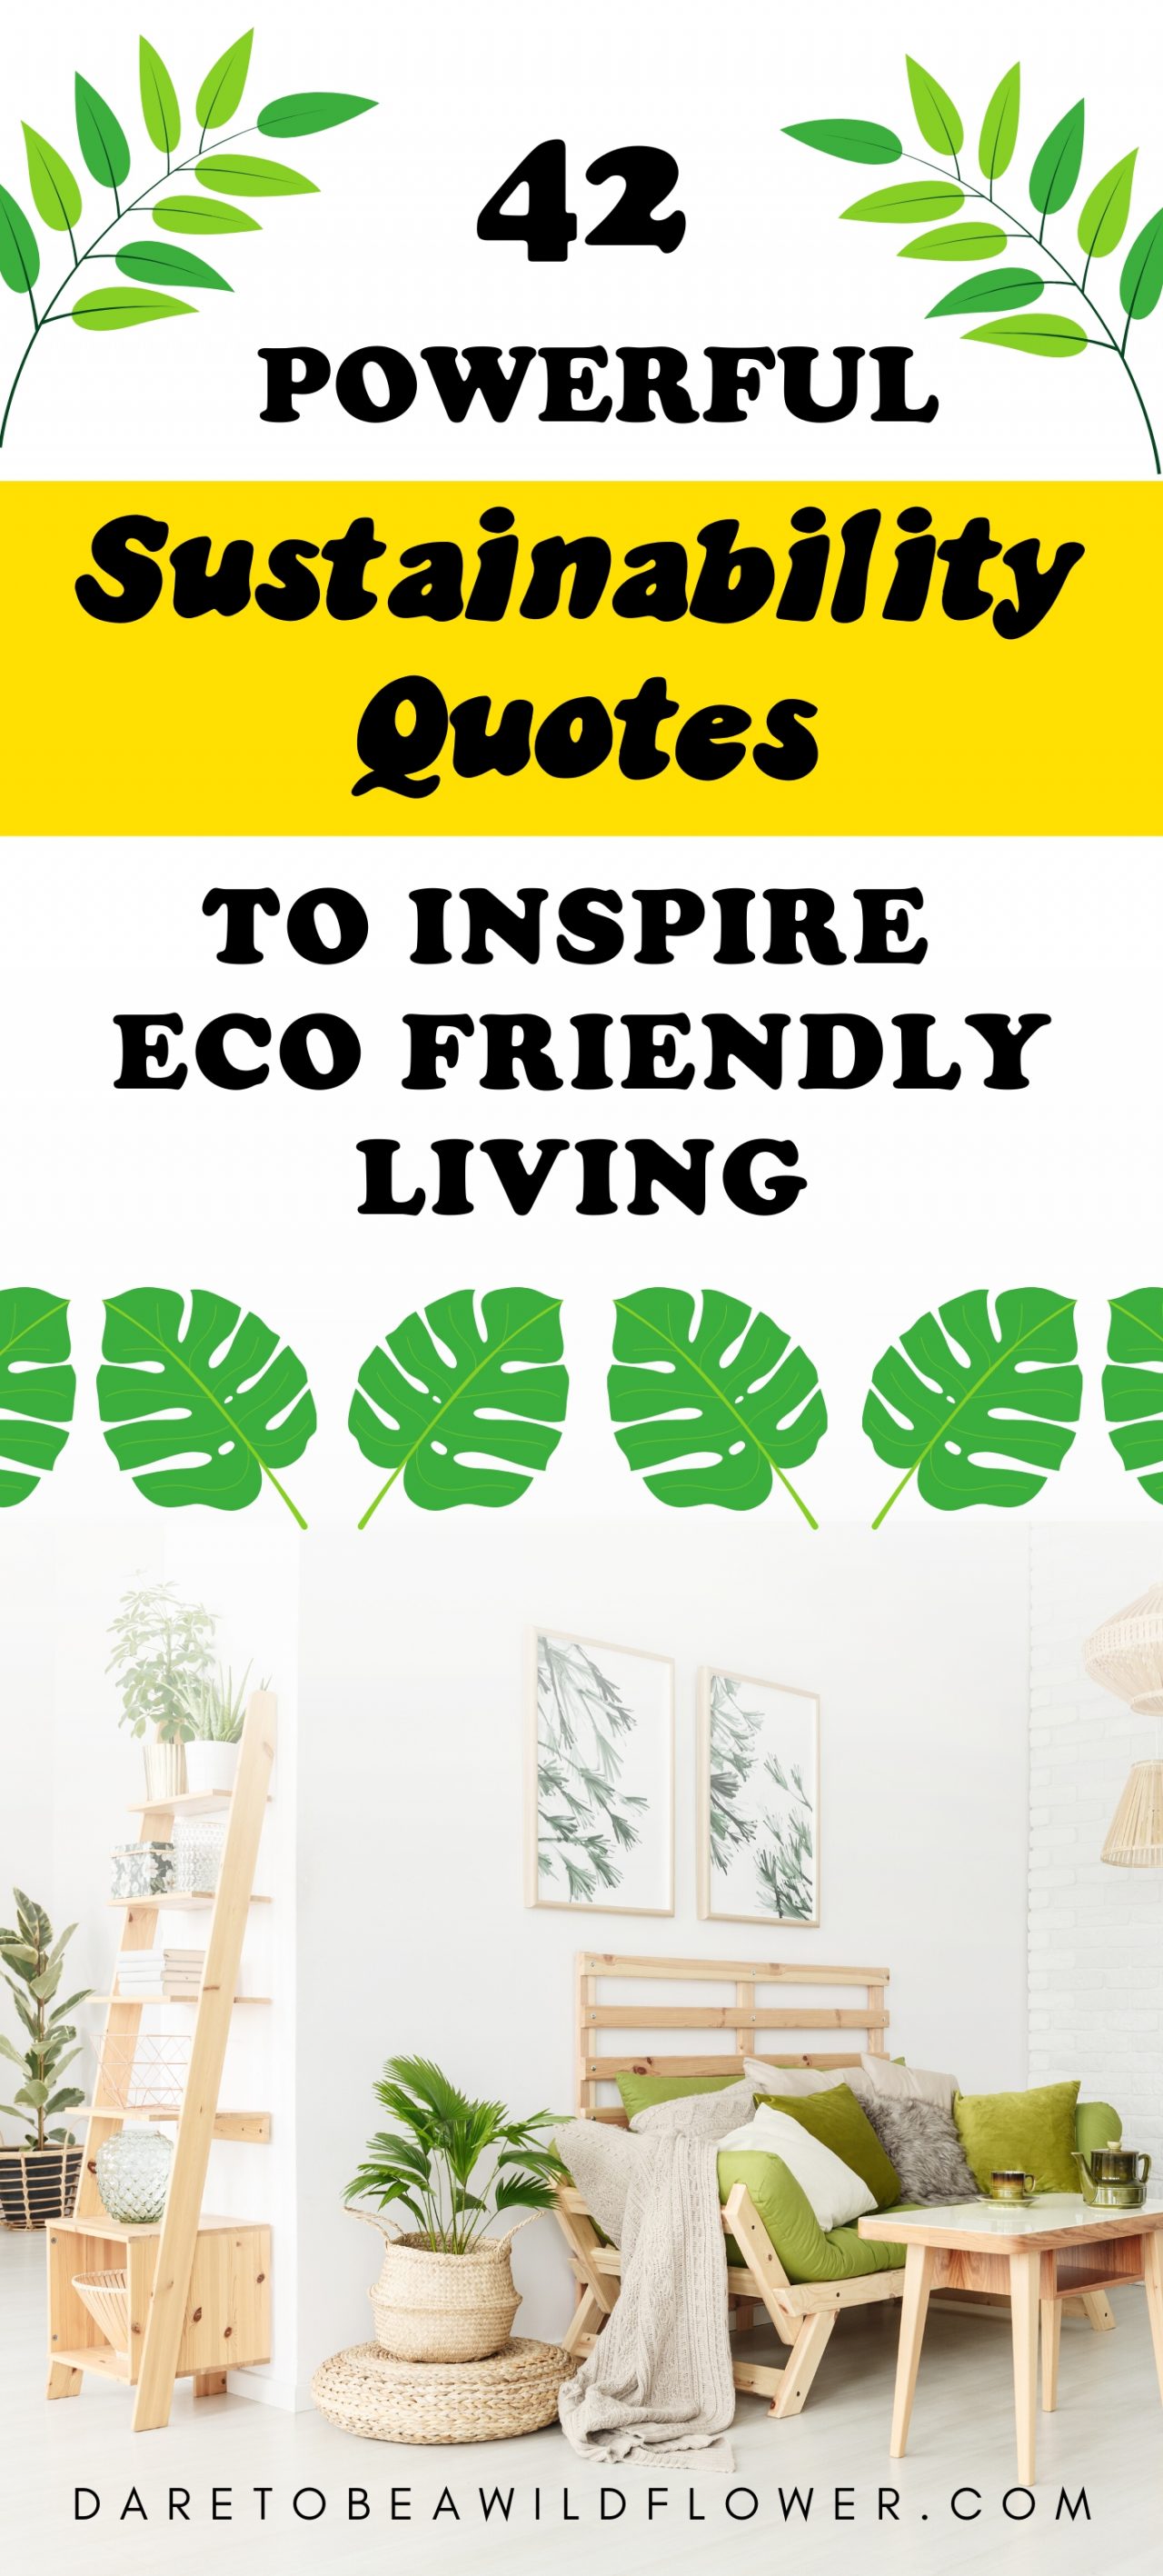 42 Powerful Sustainability Quotes To Inspire Eco Friendly Living - Dare